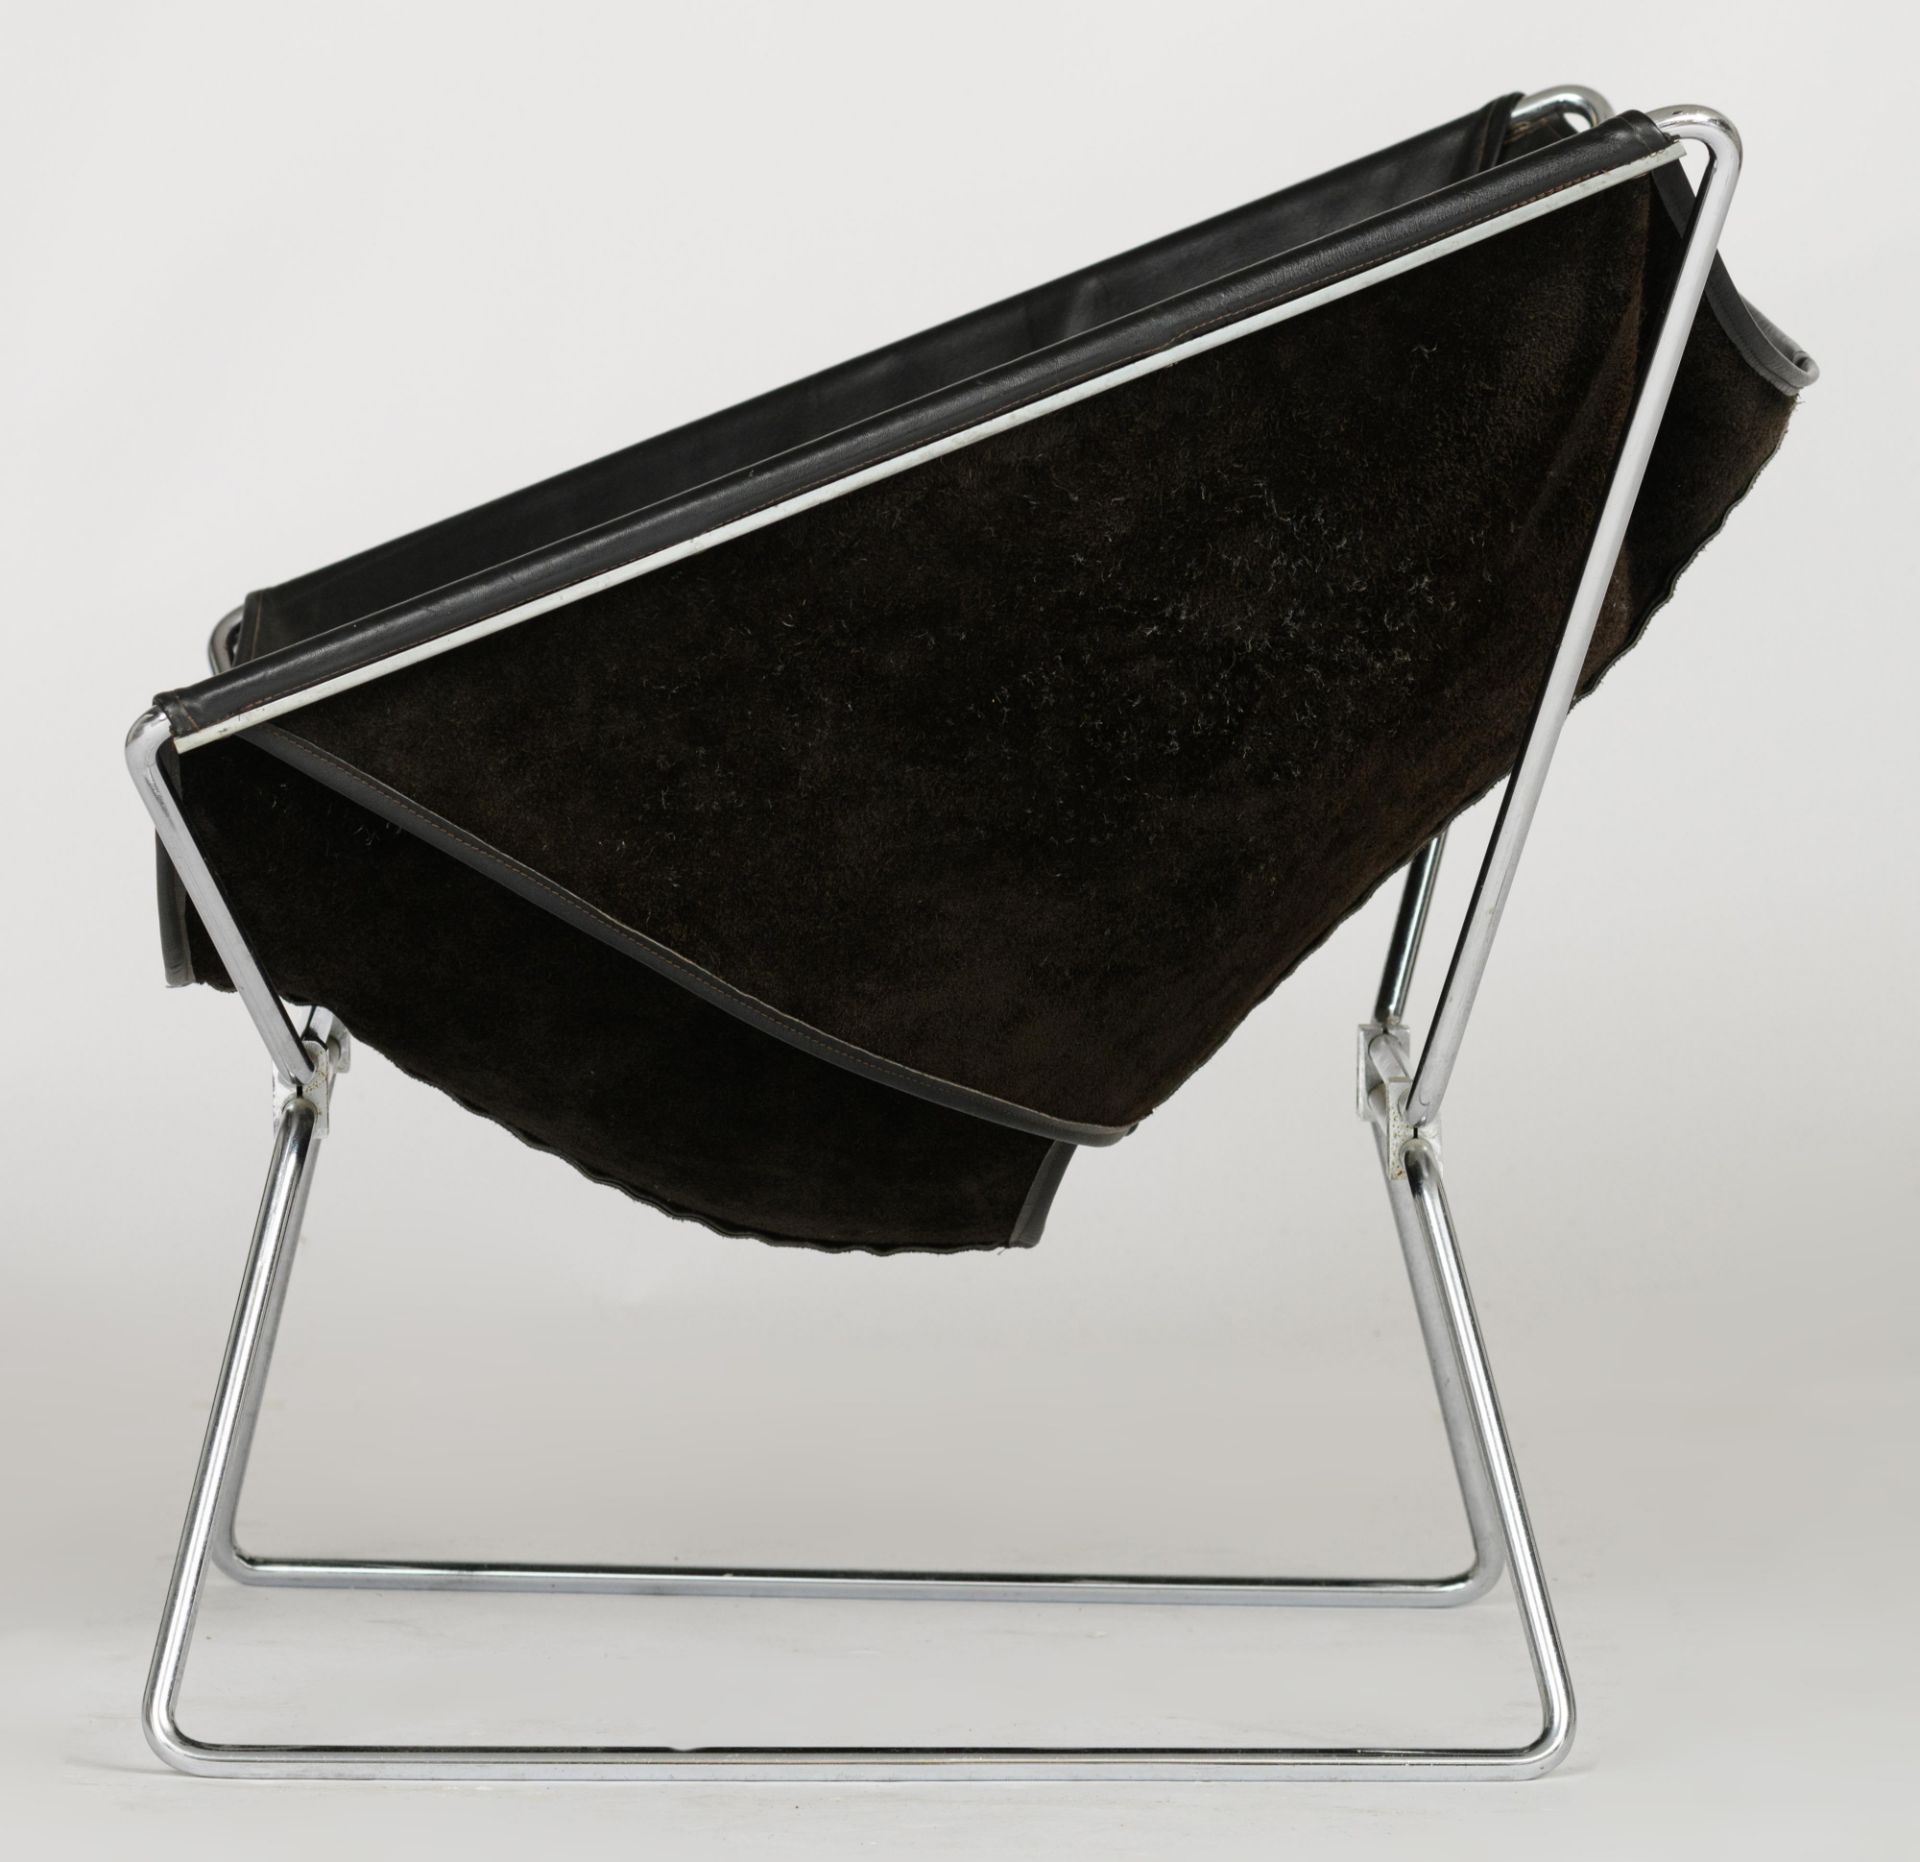 An AP-14 'butterfly' chair by Pierre Paulin for Polak, 1954, H 68,5 - W 77 - D 72 cm - Image 3 of 7